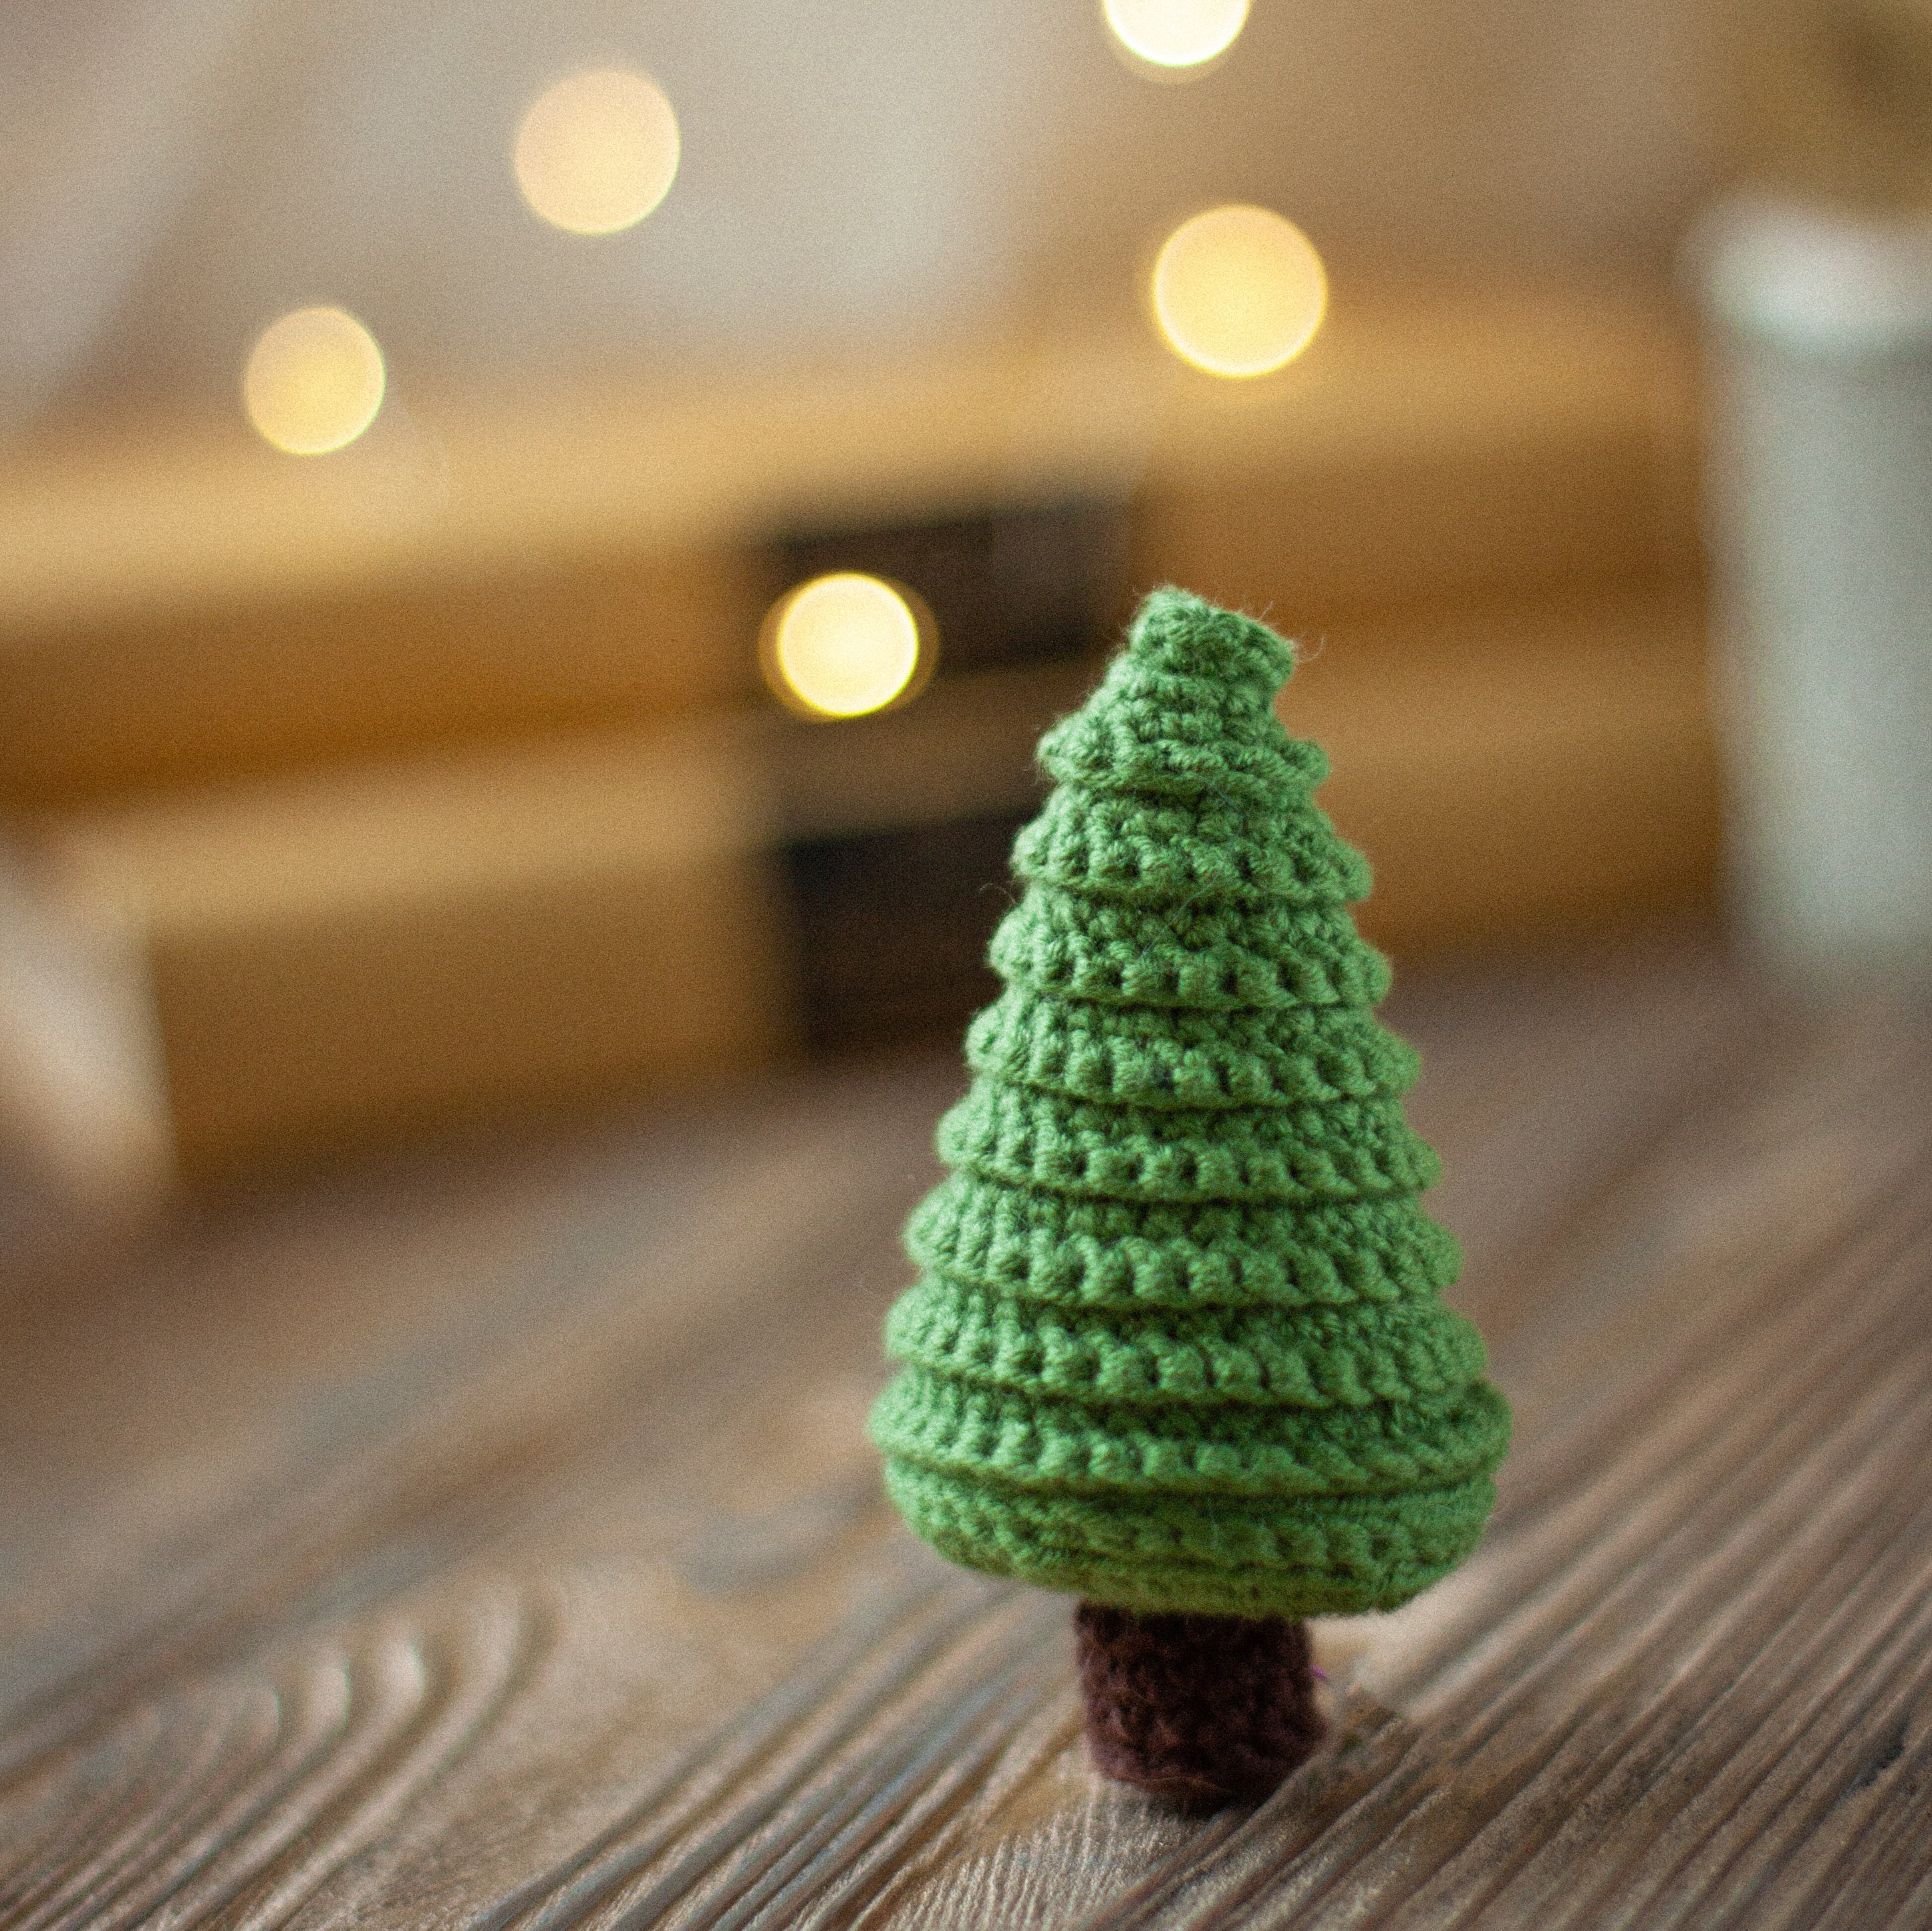 Spread Holiday Cheer with Free Christmas Tree Crochet Pattern!